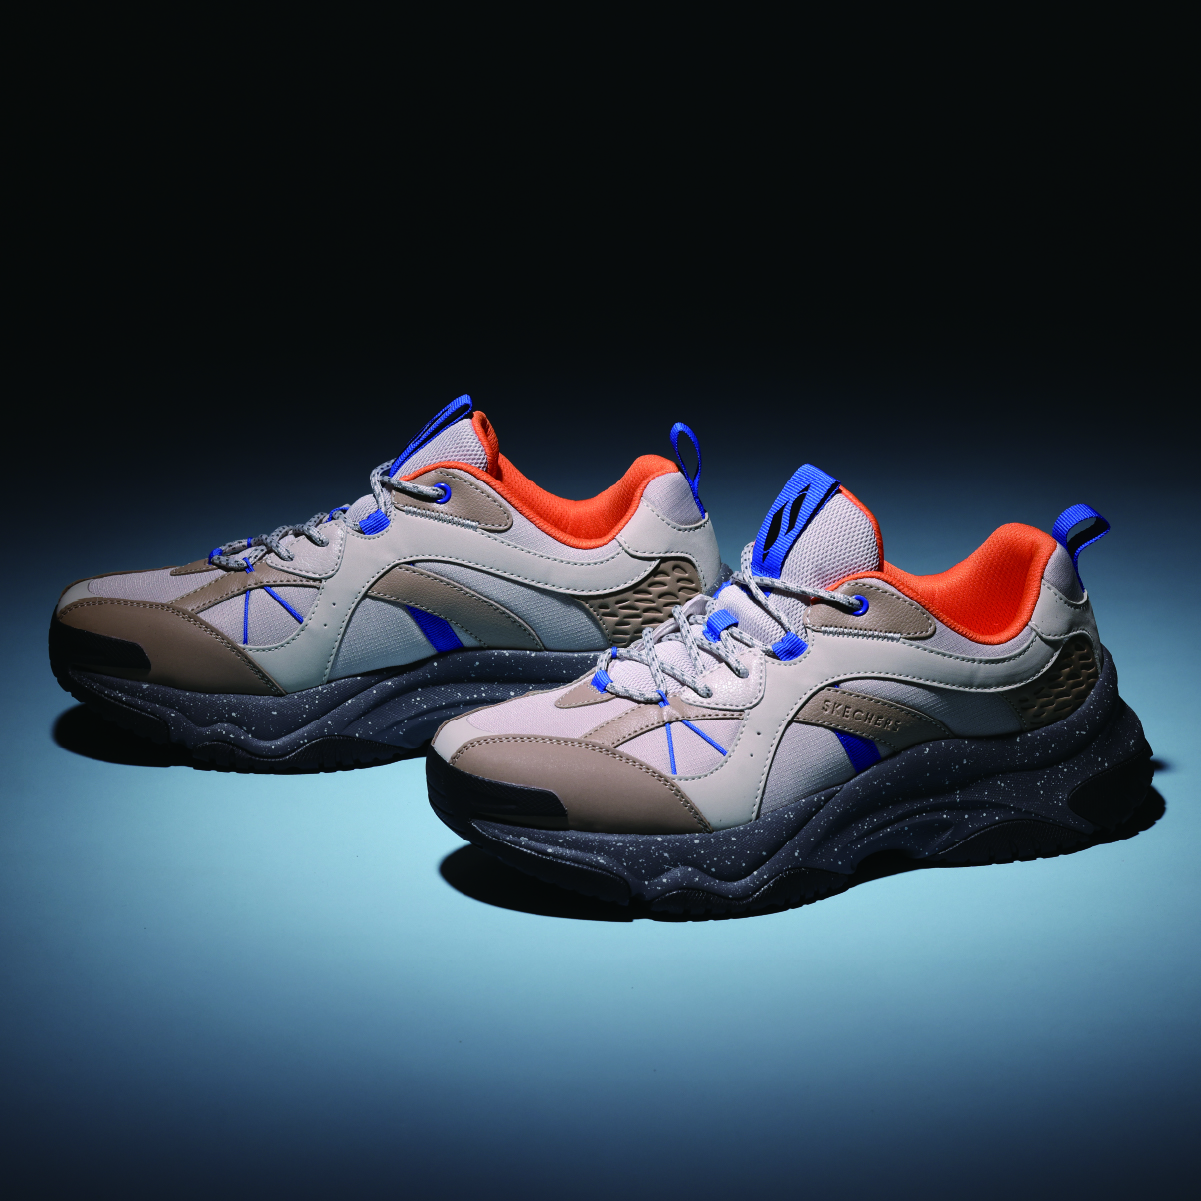 SKECHERS Urban Outdoor Collection brings back Dad Shoes street fashion  style - Hong Kong Times Square